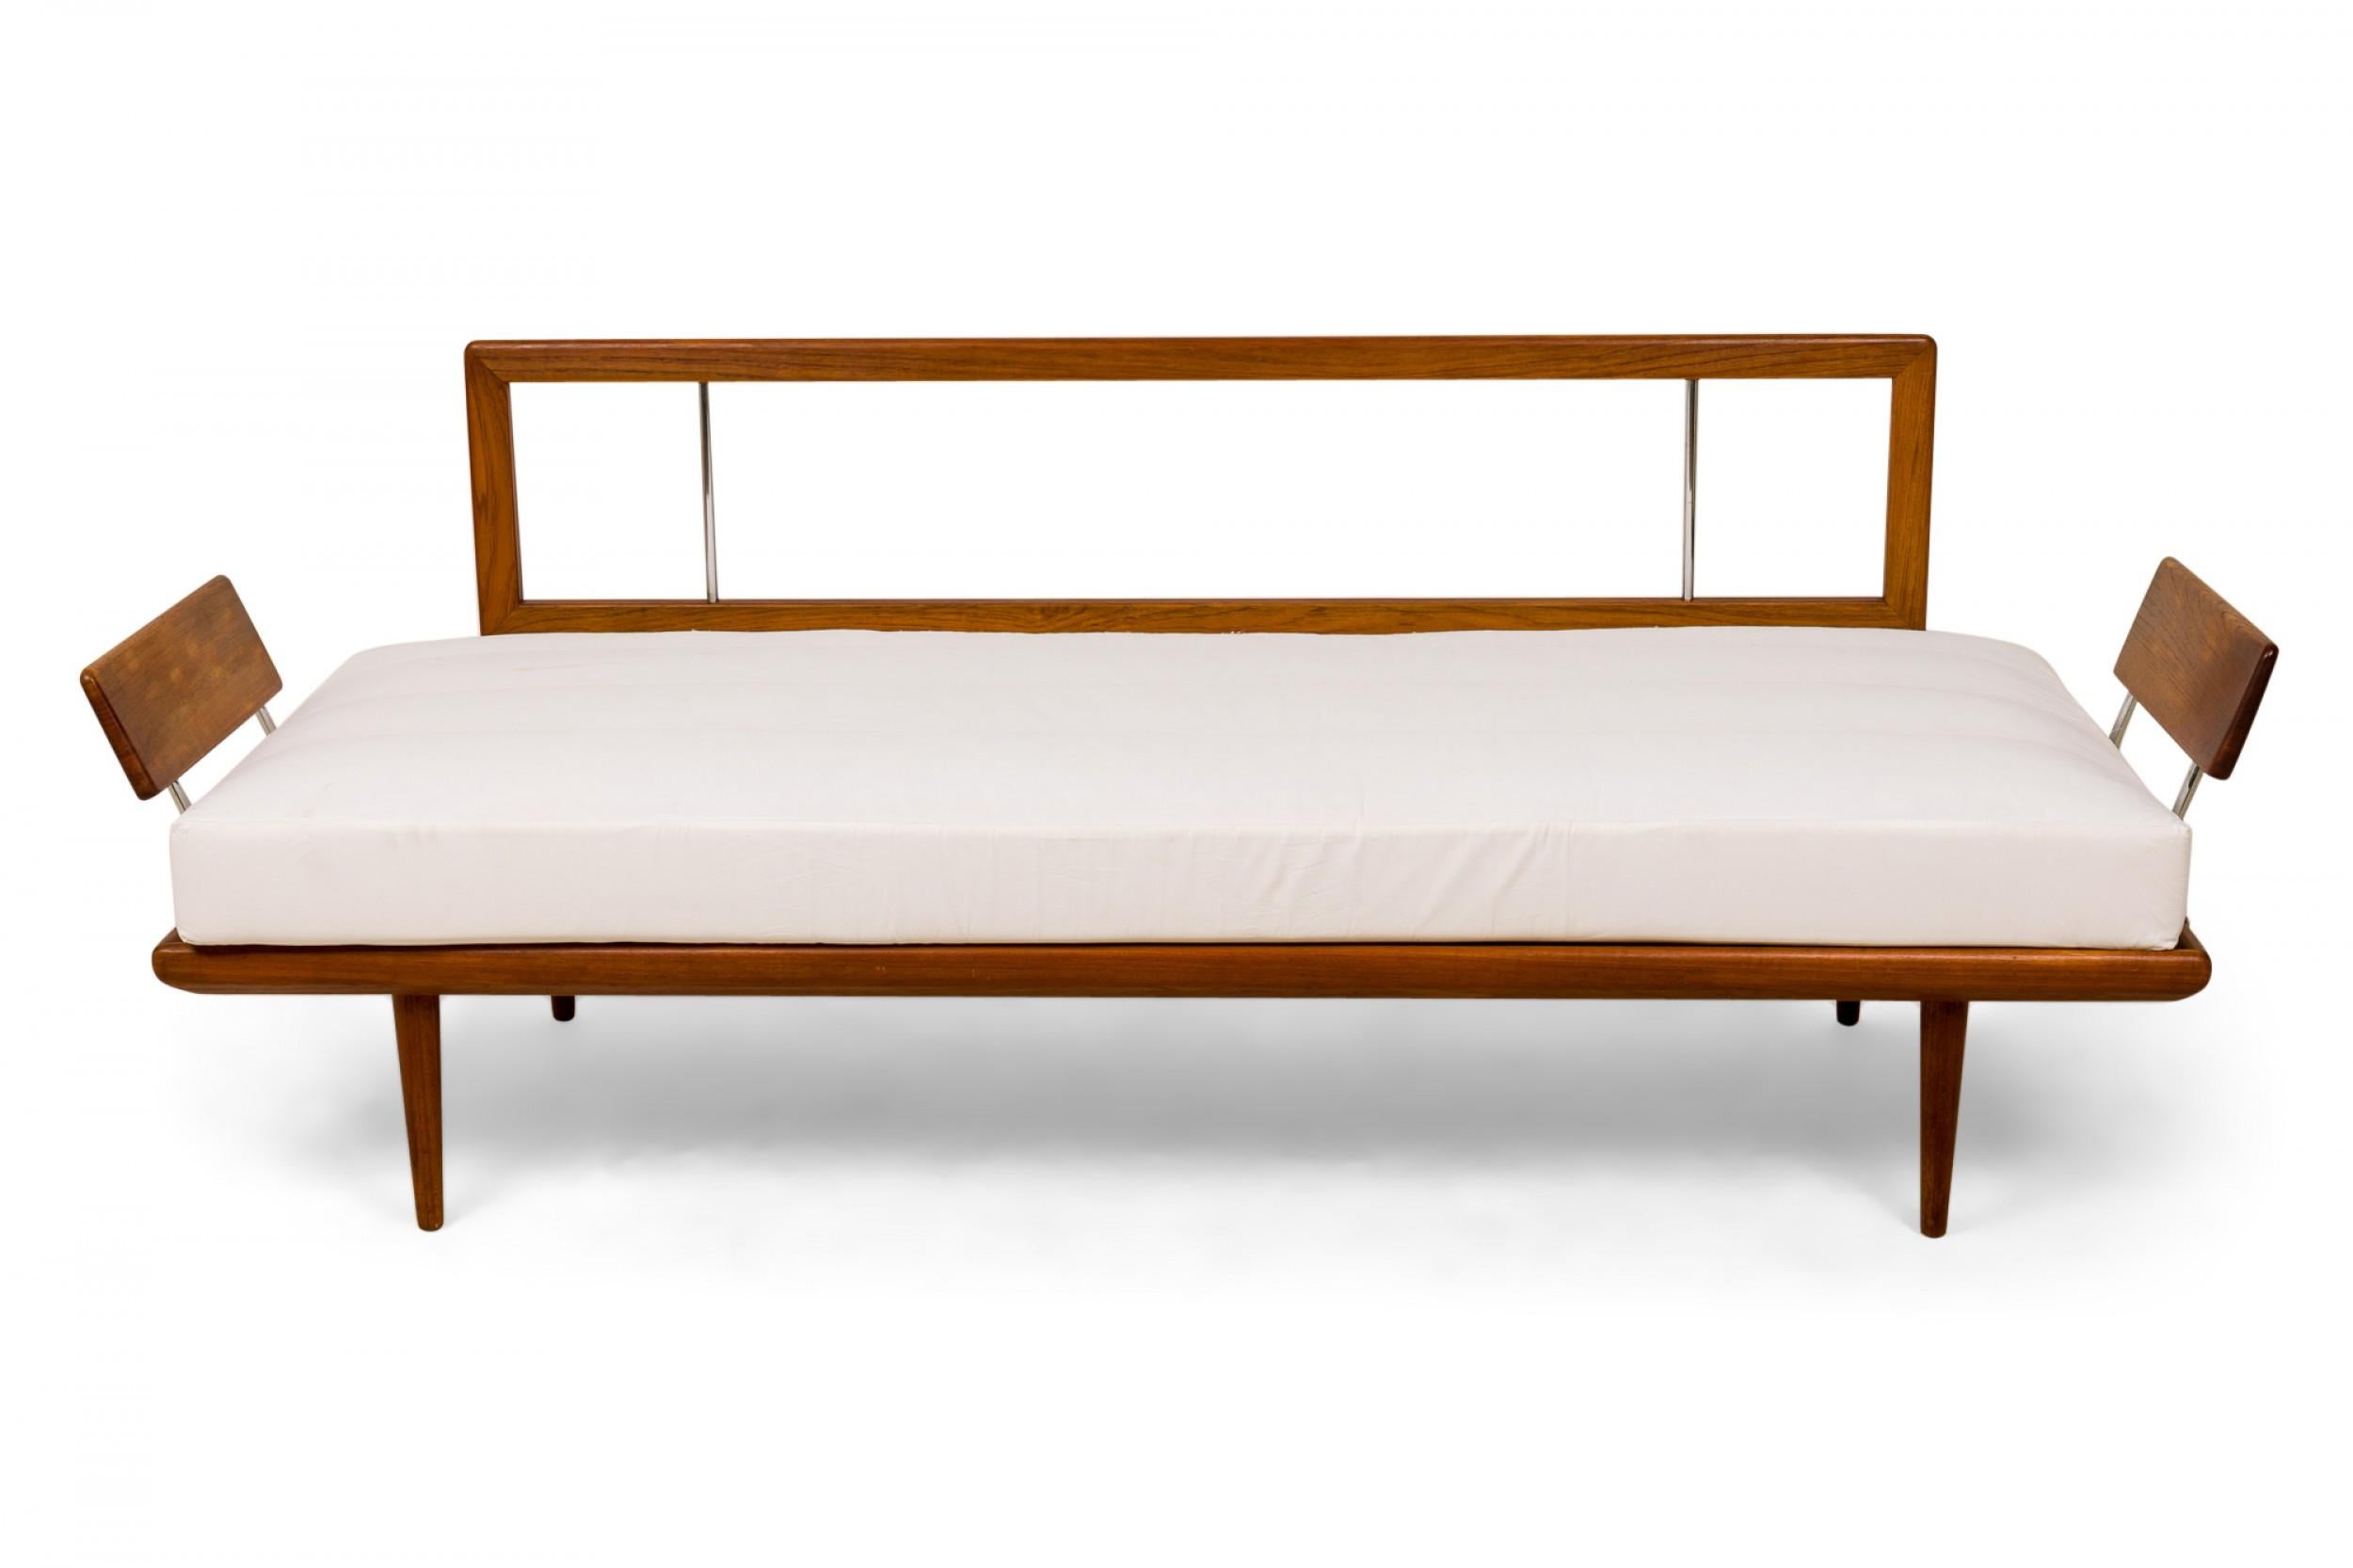 Danish Mid-Century (1960s) 'Minerva' teak sofa with an open framed teak wood back, teak paddle arms anchored to the base frame with chrome bars, and an off-white fabric seat cushion. (PETER HVIDT & ORLA MØLGAARD-NIELSEN)
 